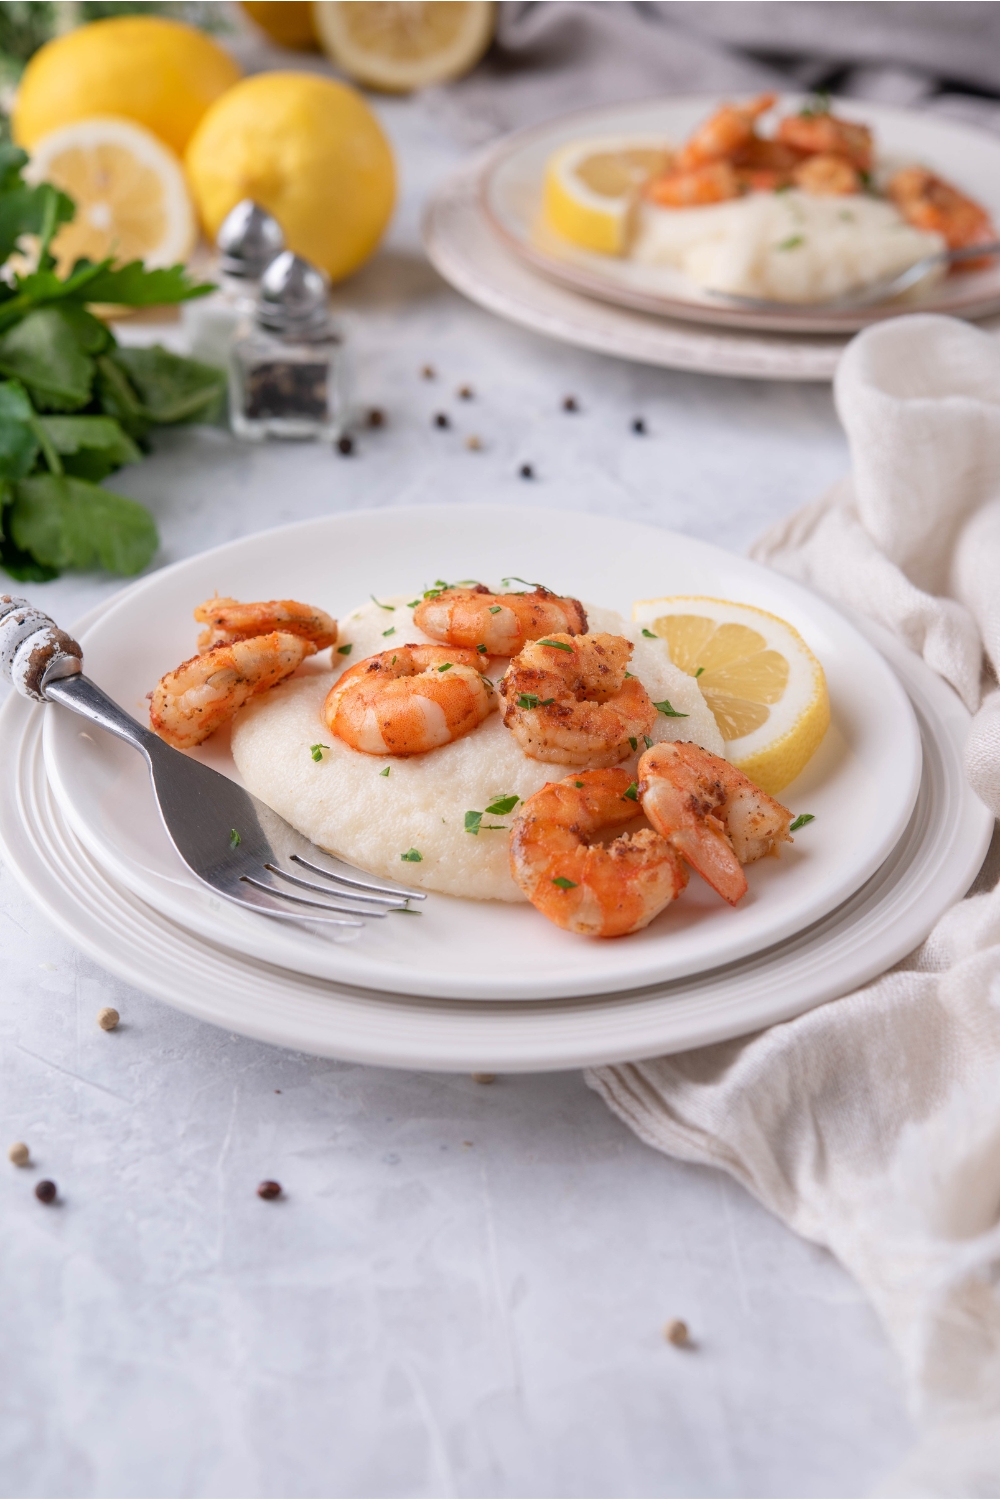 Pan seared shrimp atop grits with a garnish of fresh herbs and a lemon wedge. The plate of shrimp is on a second plate and there is a fork on the plate. In the background are more lemons and a second serving of shrimp.